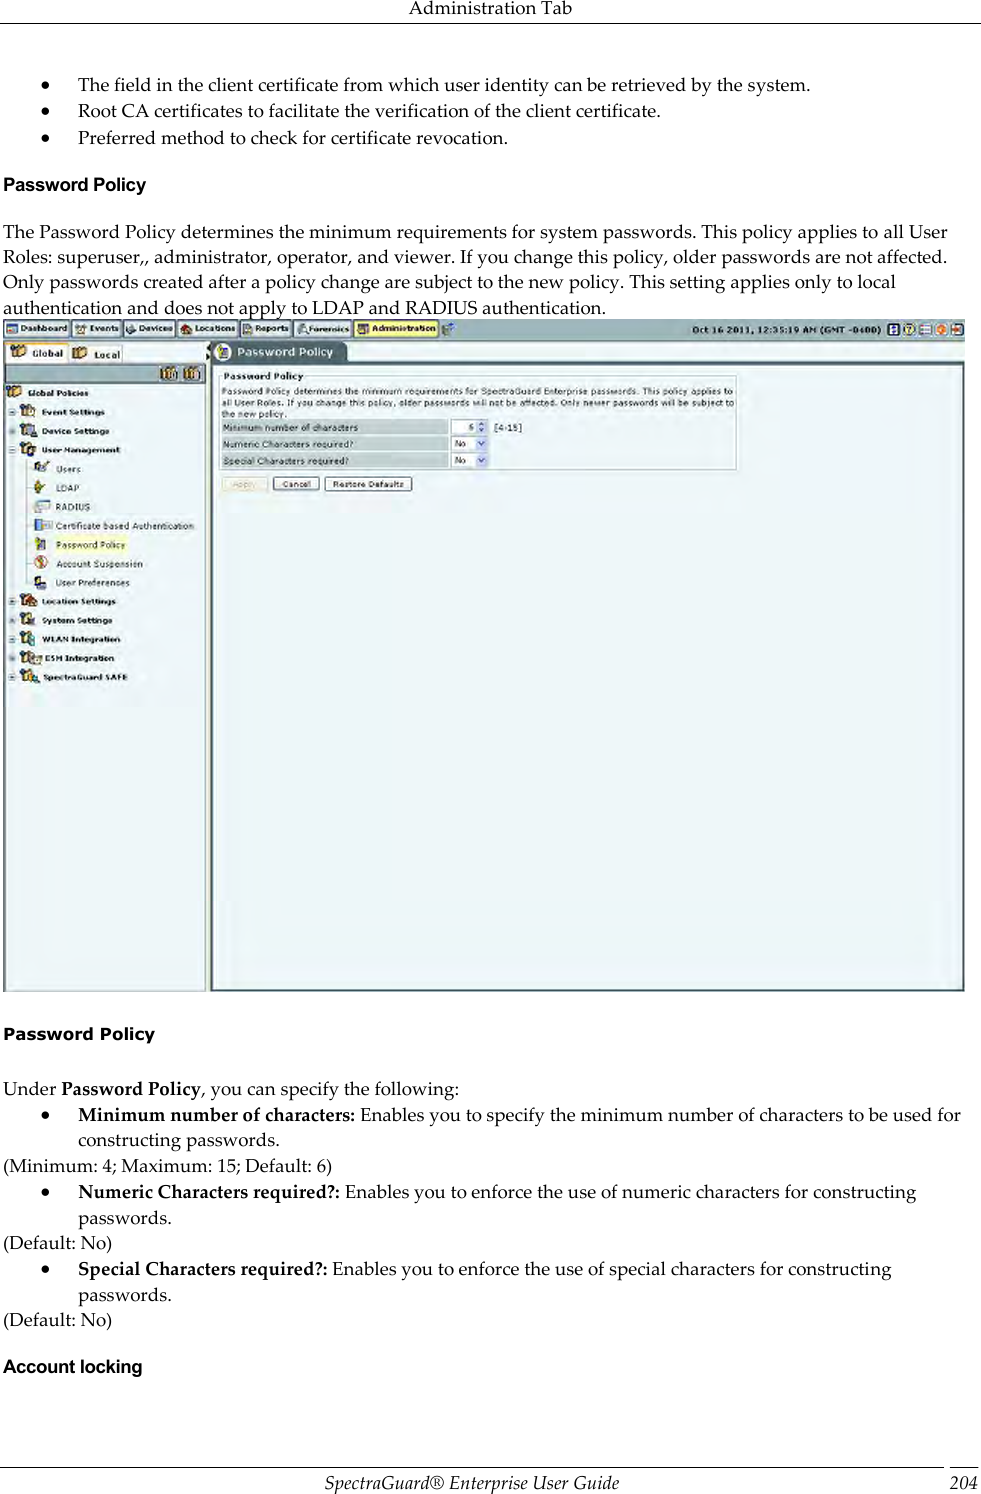 Administration Tab SpectraGuard®  Enterprise User Guide 204  The field in the client certificate from which user identity can be retrieved by the system.  Root CA certificates to facilitate the verification of the client certificate.  Preferred method to check for certificate revocation. Password Policy The Password Policy determines the minimum requirements for system passwords. This policy applies to all User Roles: superuser,, administrator, operator, and viewer. If you change this policy, older passwords are not affected. Only passwords created after a policy change are subject to the new policy. This setting applies only to local authentication and does not apply to LDAP and RADIUS authentication.    Password Policy   Under Password Policy, you can specify the following:  Minimum number of characters: Enables you to specify the minimum number of characters to be used for constructing passwords. (Minimum: 4; Maximum: 15; Default: 6)  Numeric Characters required?: Enables you to enforce the use of numeric characters for constructing passwords. (Default: No)  Special Characters required?: Enables you to enforce the use of special characters for constructing passwords. (Default: No) Account locking 